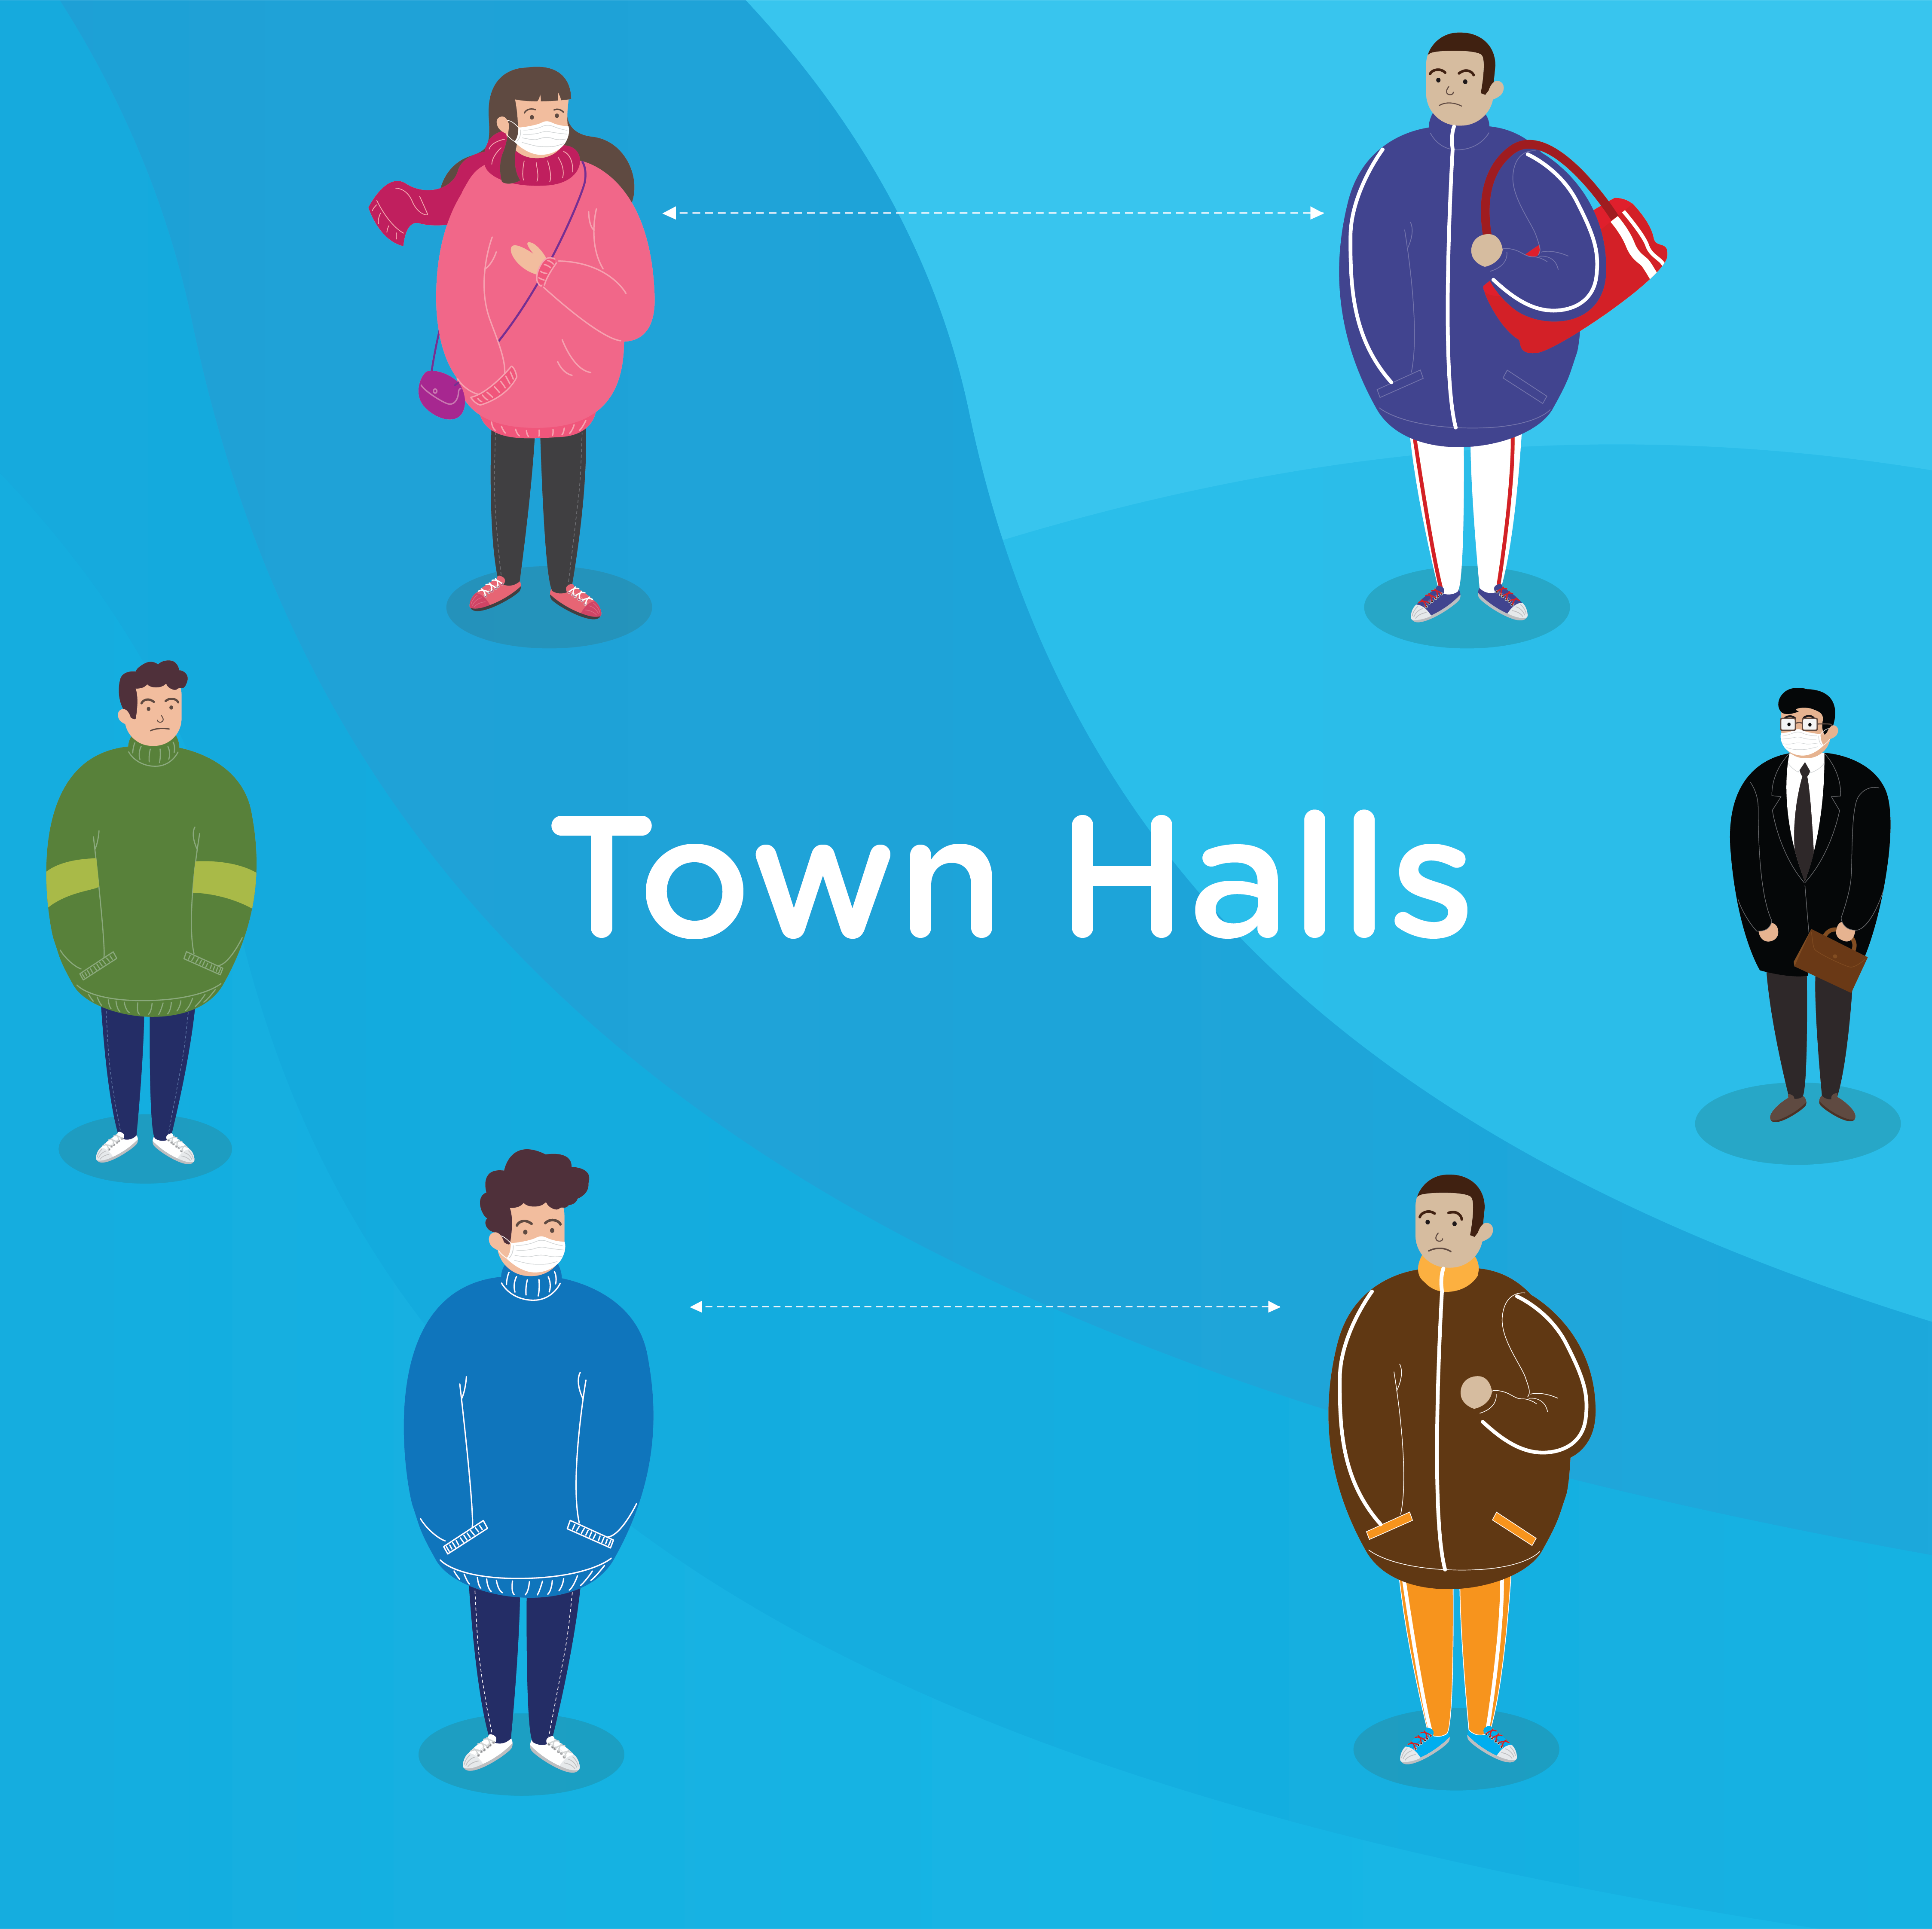 Town Halls - Coping with COVID-19